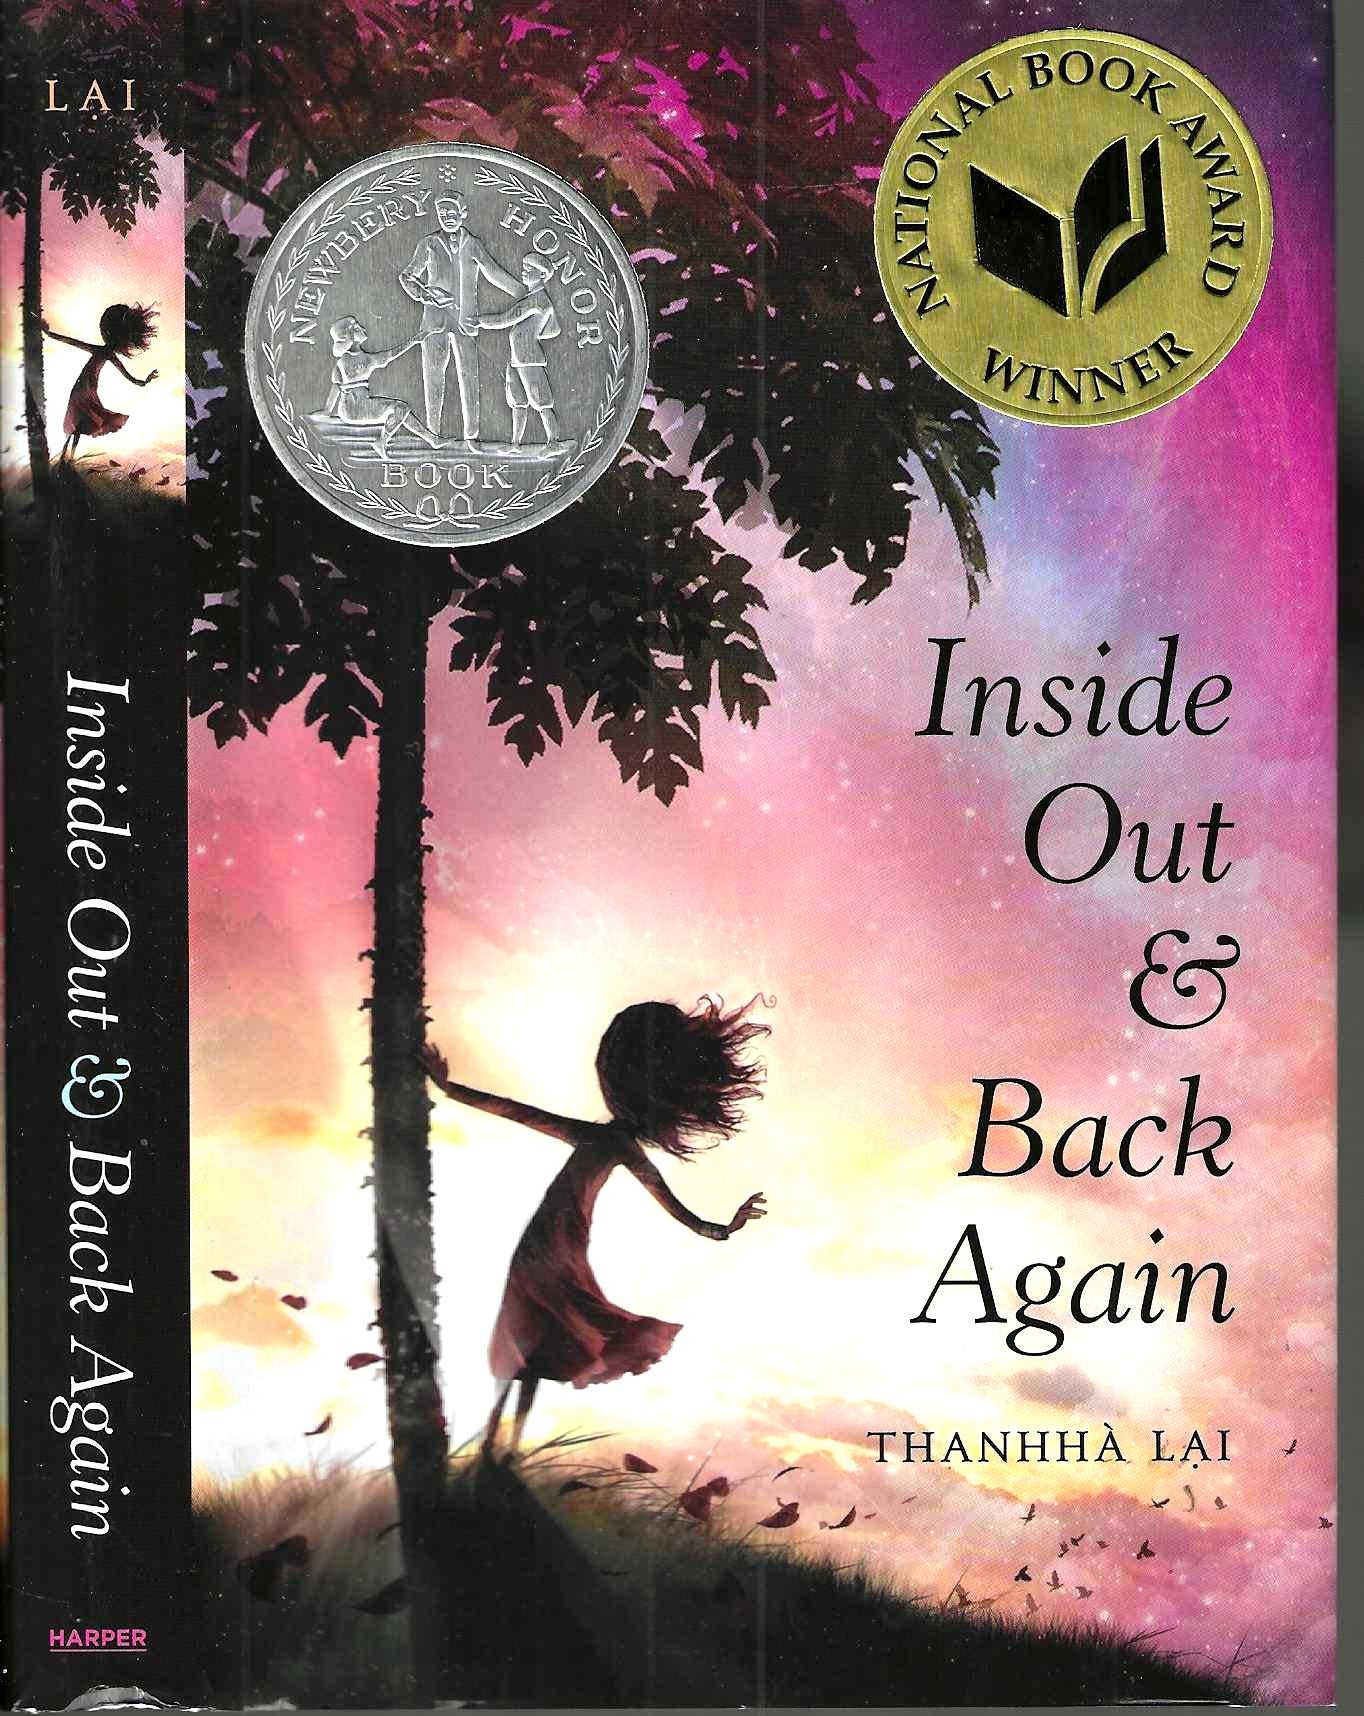 Back　Inside　Thanhha　Out　and　Again　Lai　1st　Edition